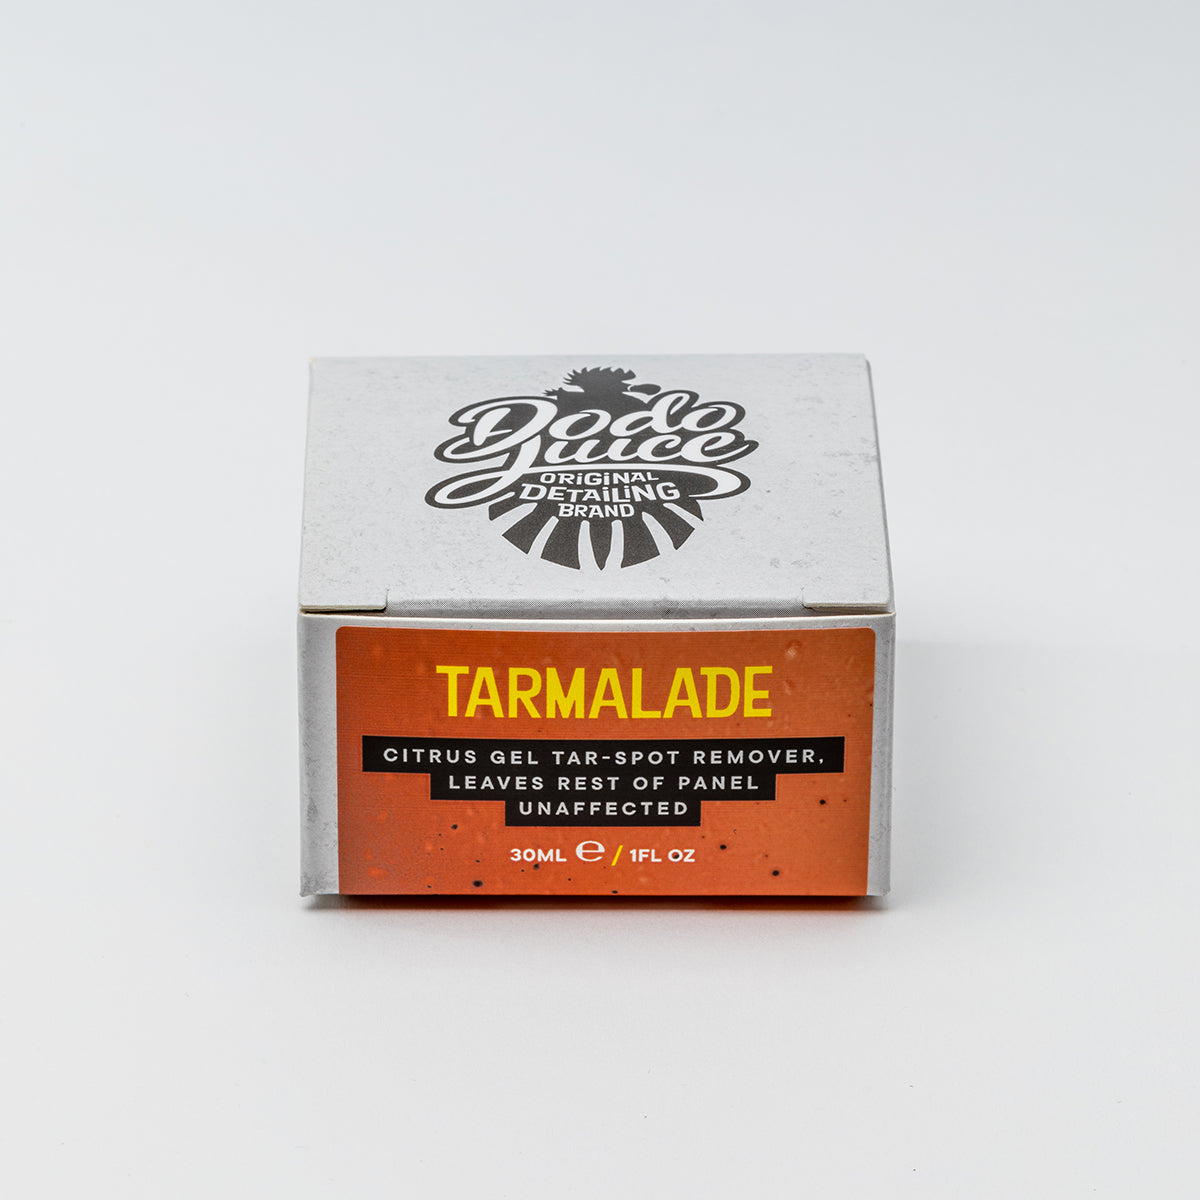 Tarmalade 30ml - tar and glue remover paste - non-drip and highly economical HS 3301121000